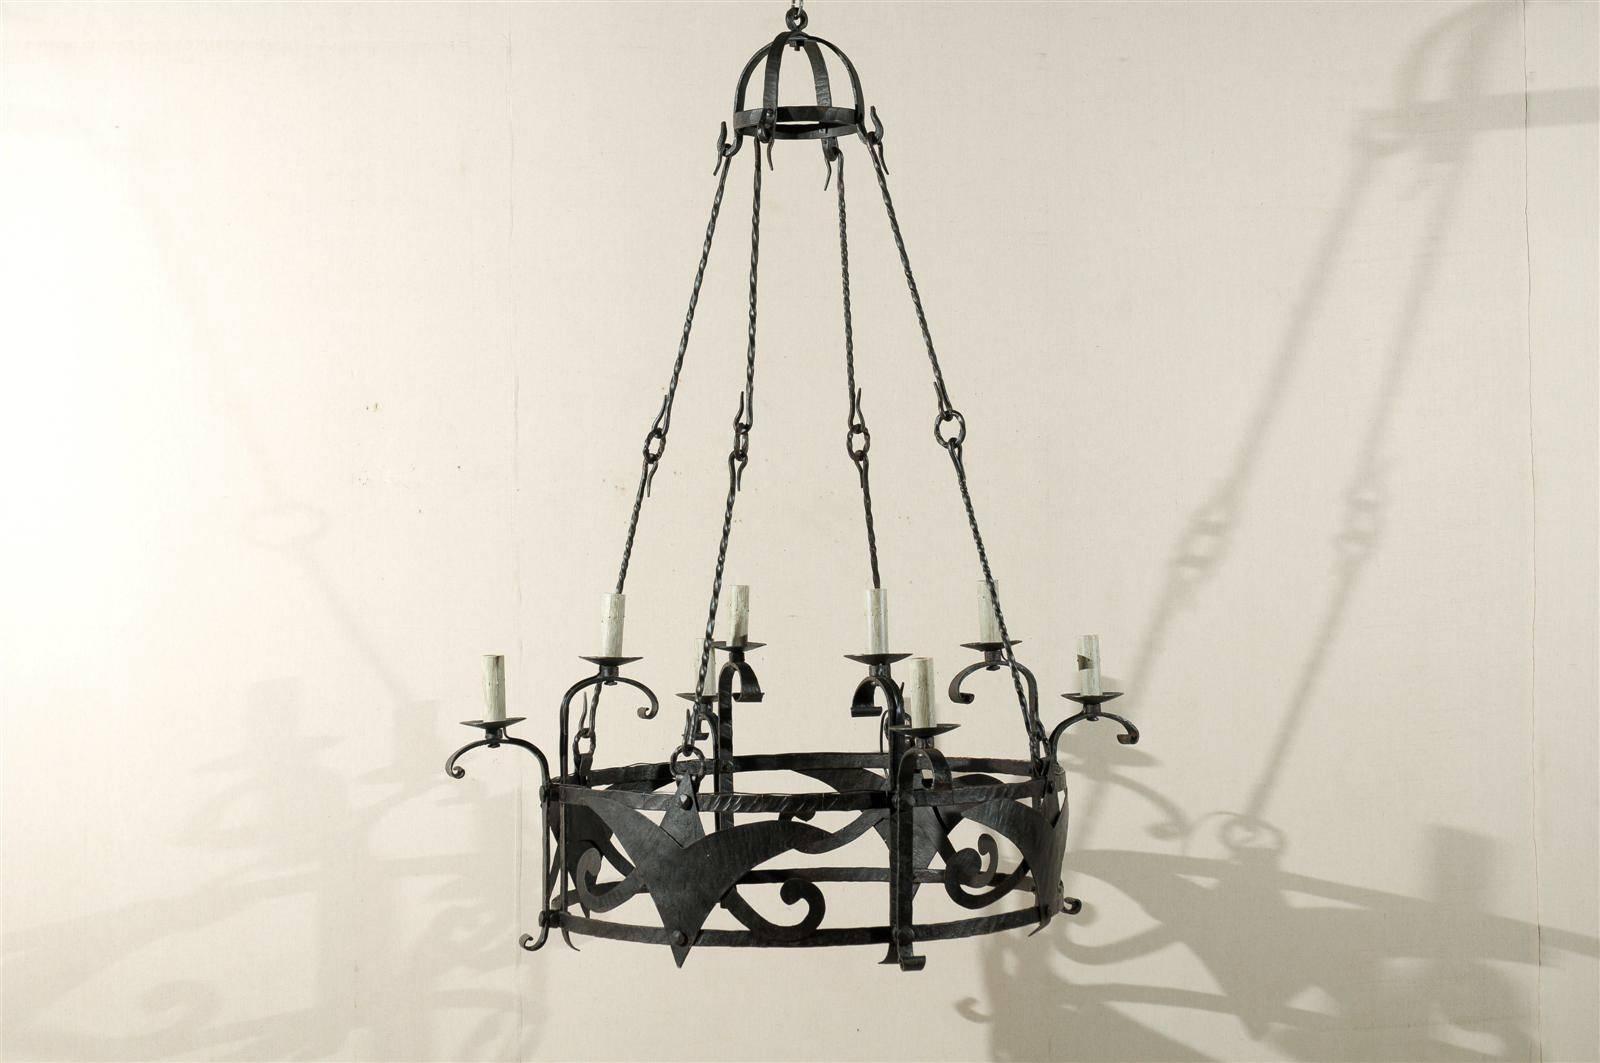 A large sized Italian mid-20th century eight-light chandelier with stylized motifs on the circular ring and domed canopy.  This chandelier has a wonderful old rusty black oxidized finish.

This iron chandelier has been rewired for the US and comes